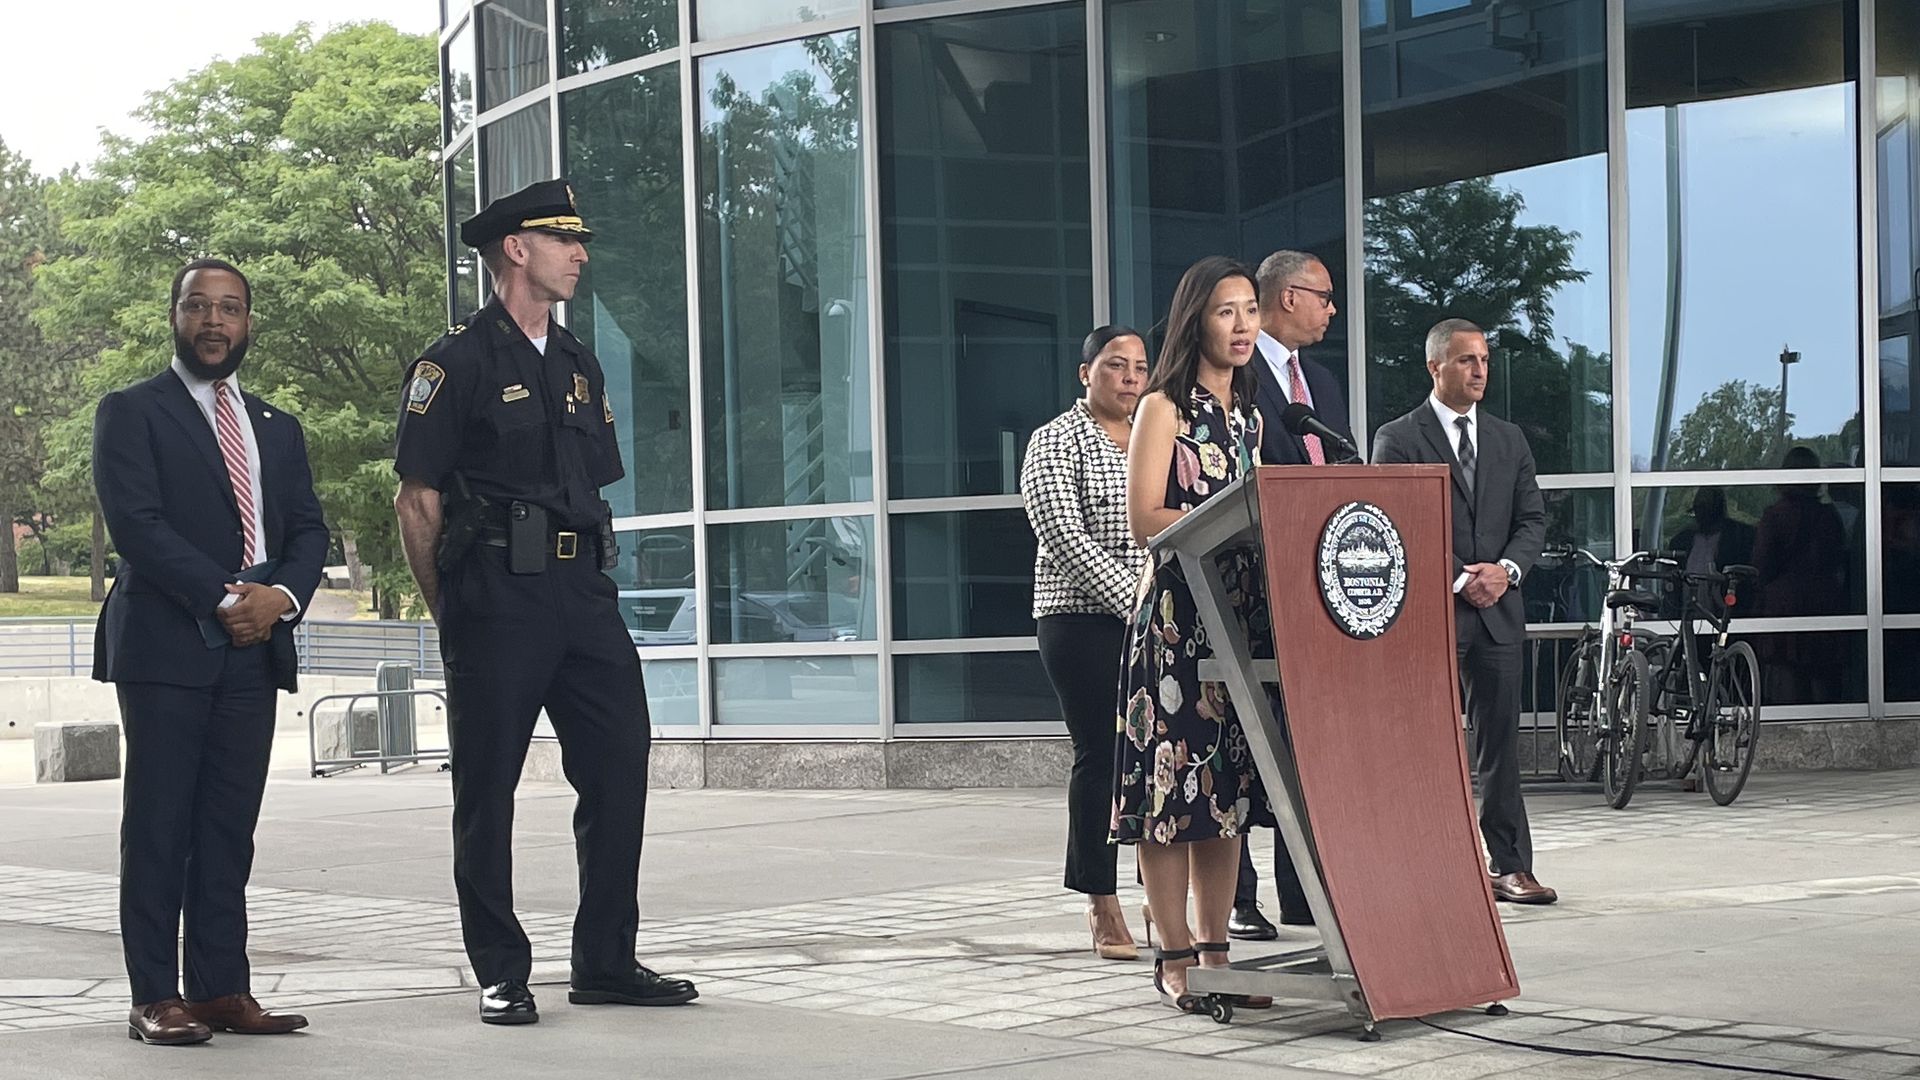 Mayor Michelle Wu speaks at a podium outside the entrance of Boston Police Department headquarters in Boston.